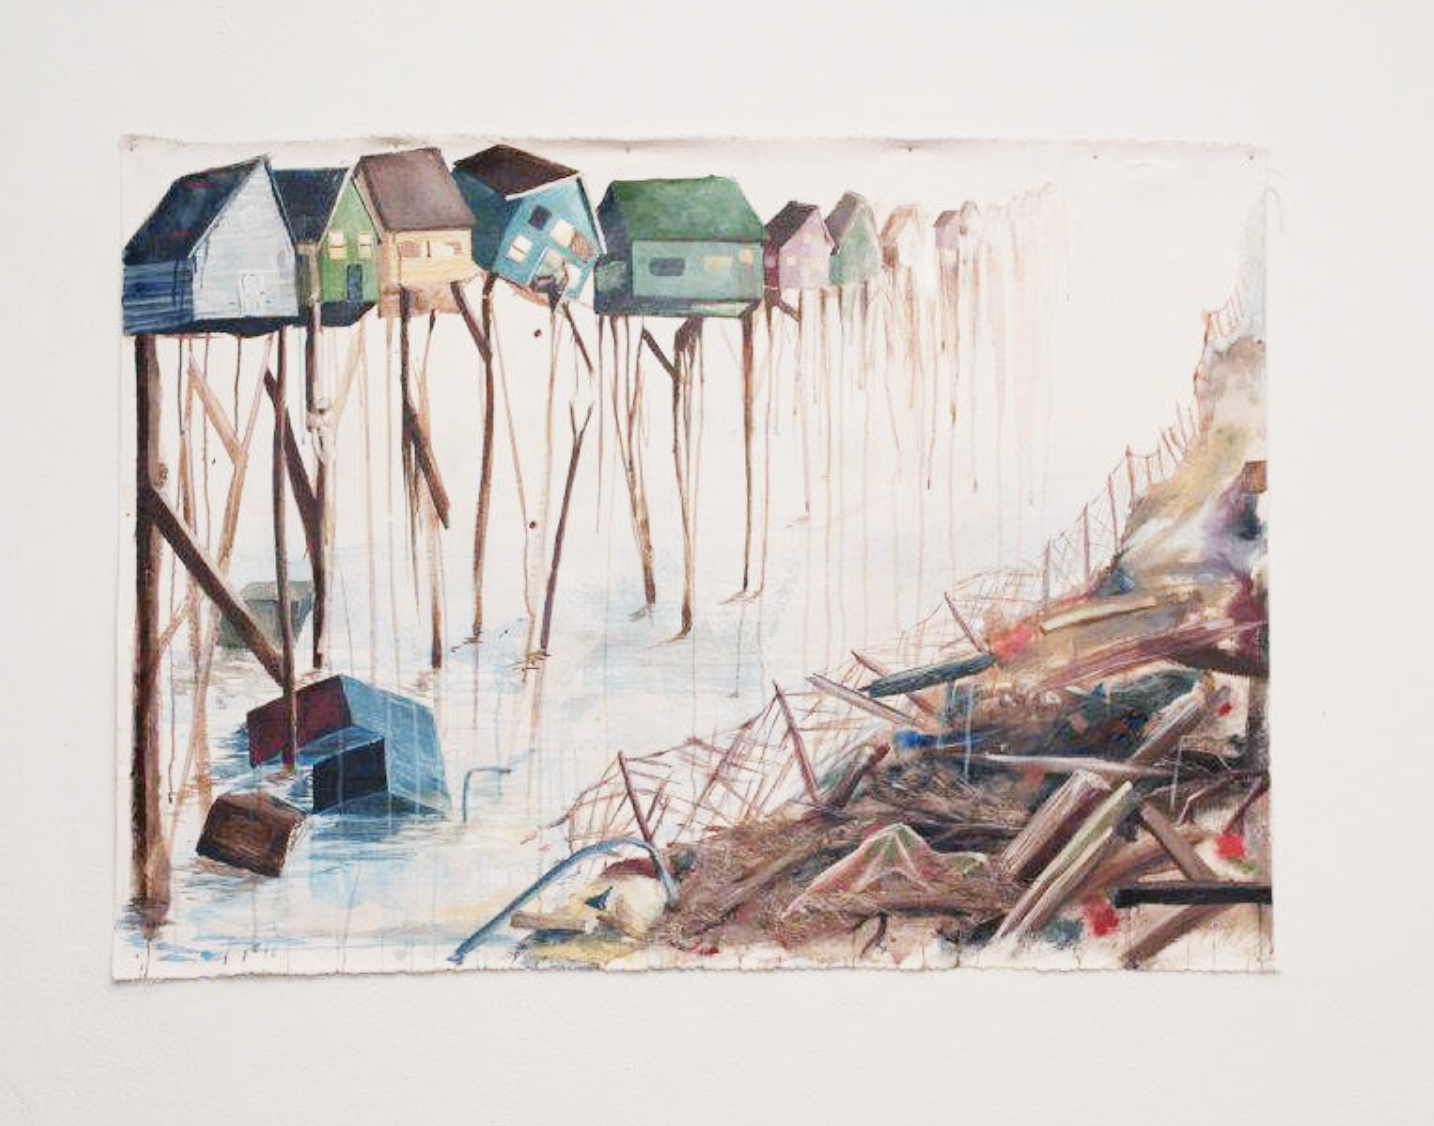 Painting student work featuring a row of colorful houses on stilts and opposite a pile of rubbish.